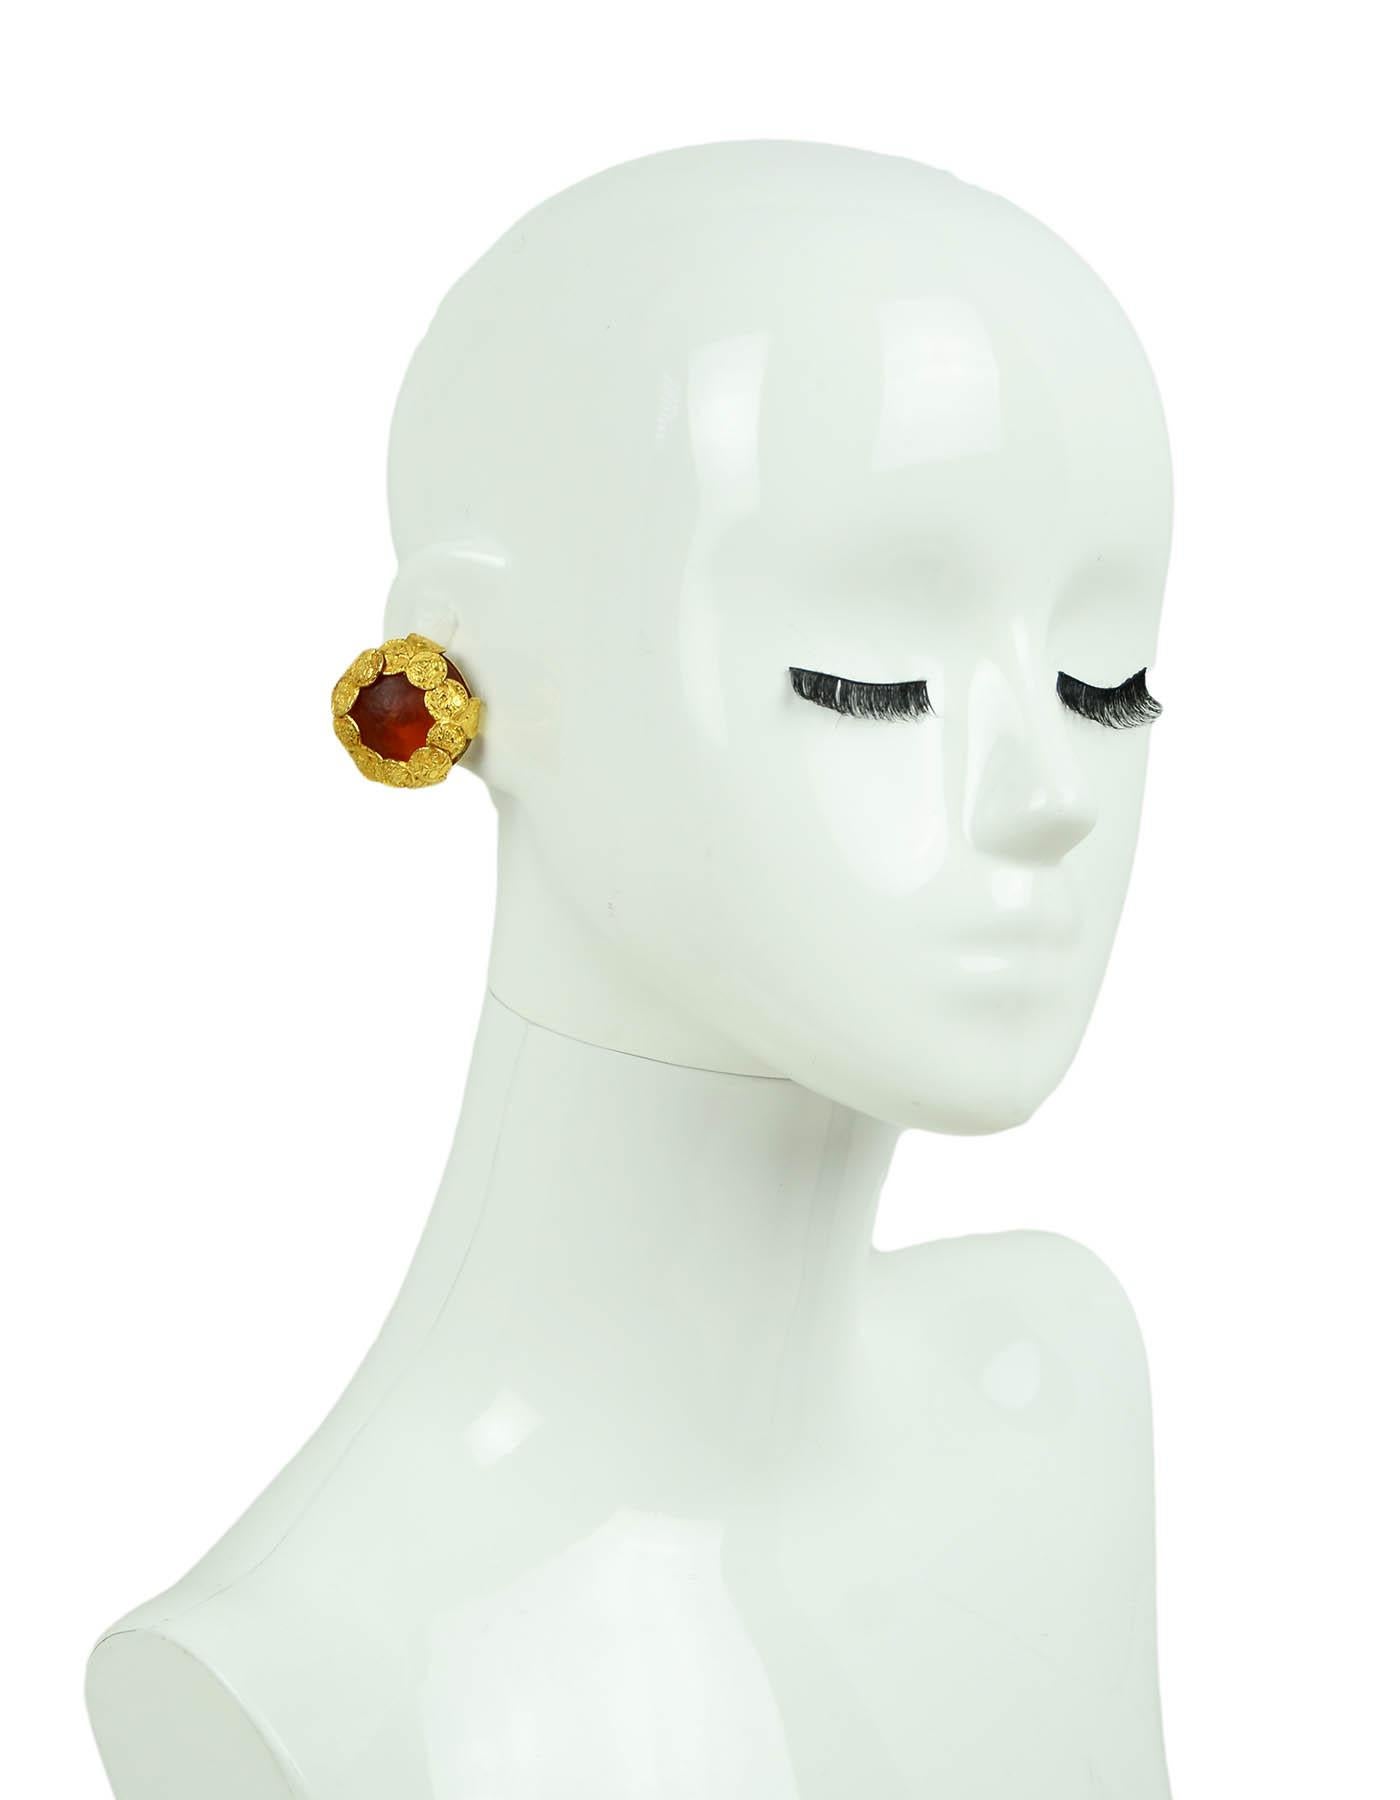 Dominique Aurientis Vintage Gripoix Glass Coin Clip On Earrings

Year of Production: 1980s
Color: Gold and orange
Materials: Metal and glass
Hallmarks: Dominique Aurientis Paris
Closure/Opening: Clip on 
Overall Condition: Excellent

Measurements: 